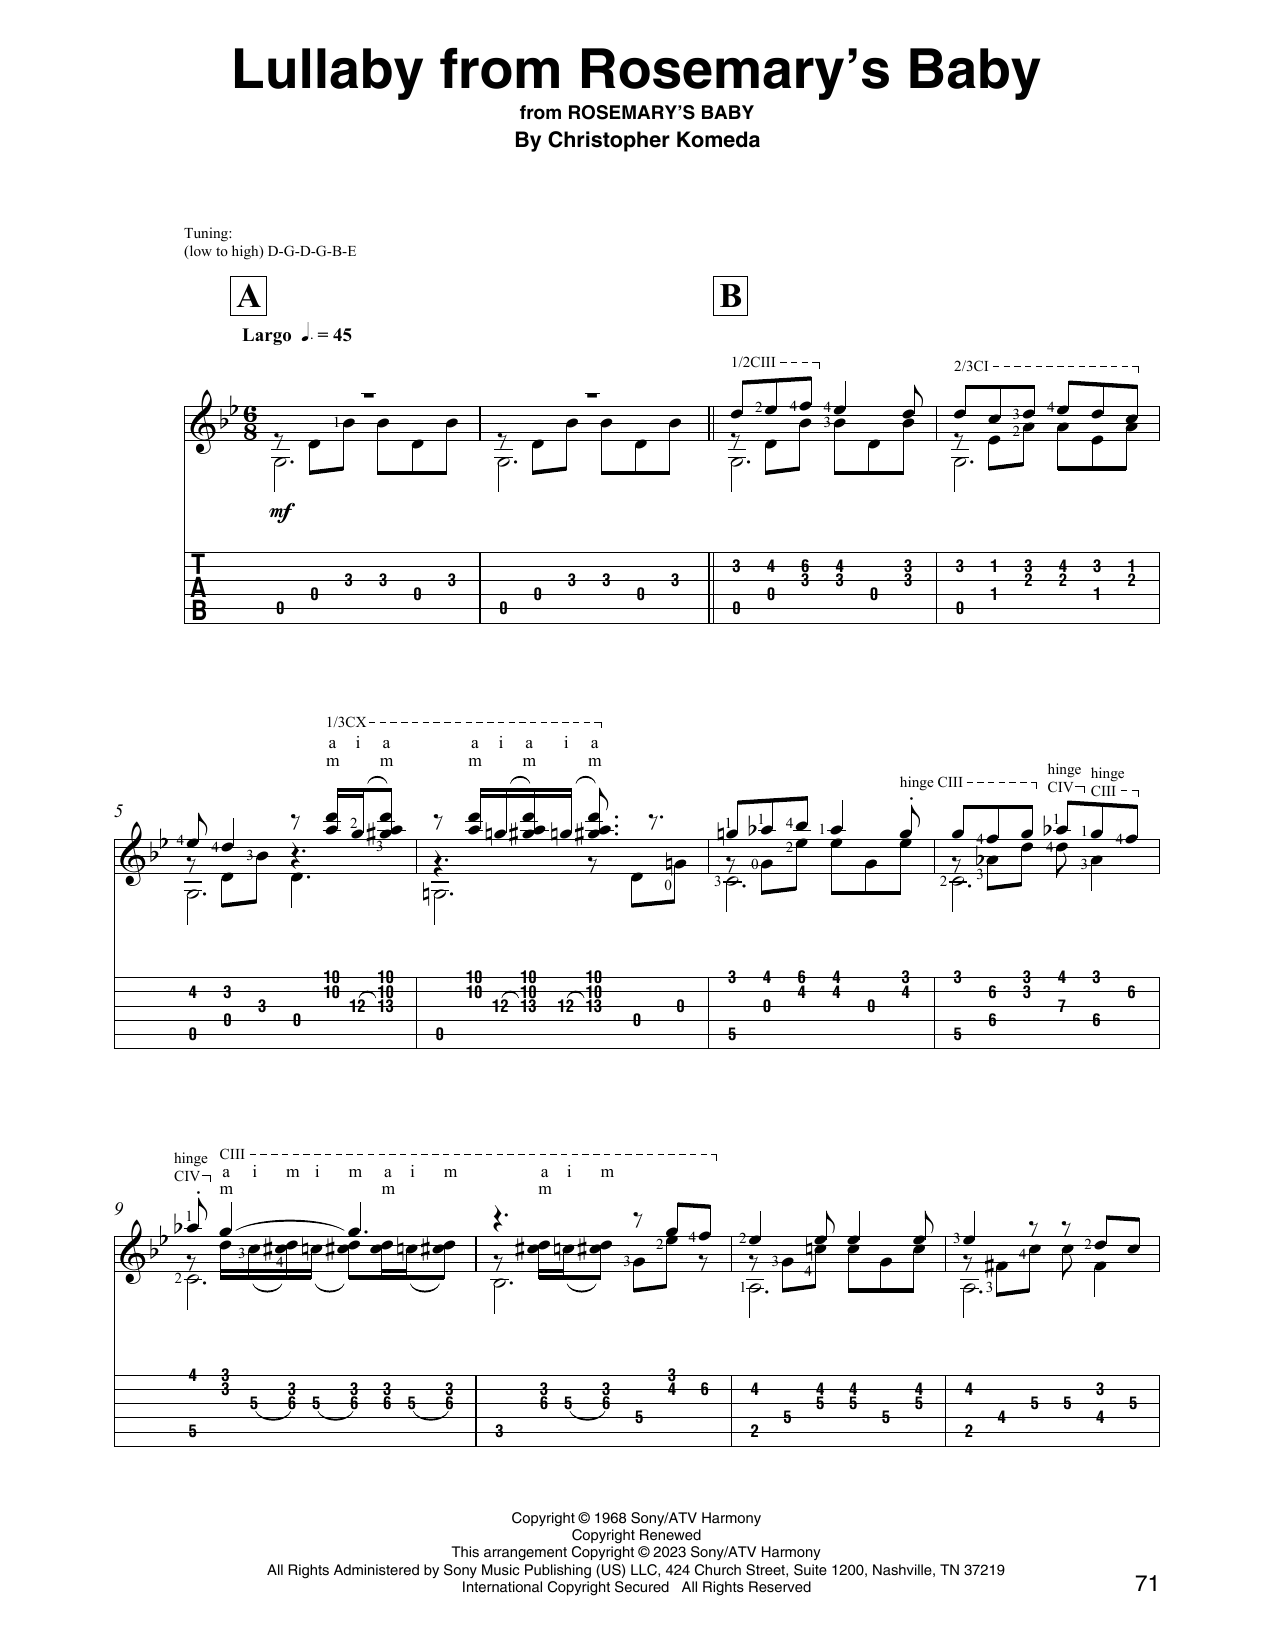 Christopher Komeda Lullaby From Rosemary's Baby sheet music notes printable PDF score